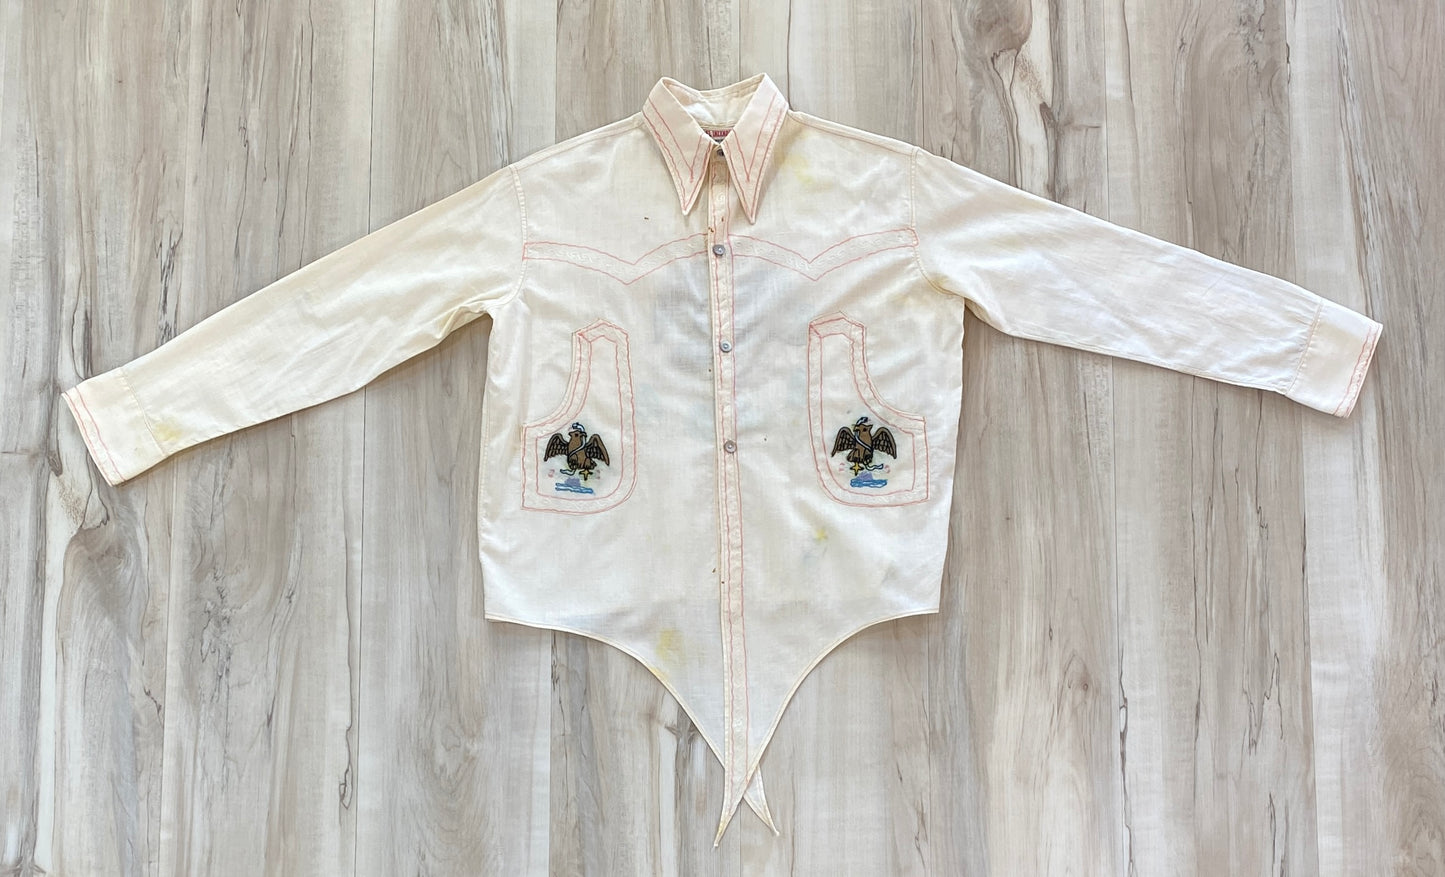 1940s Embroidered Mexican Shirt Women's Size S